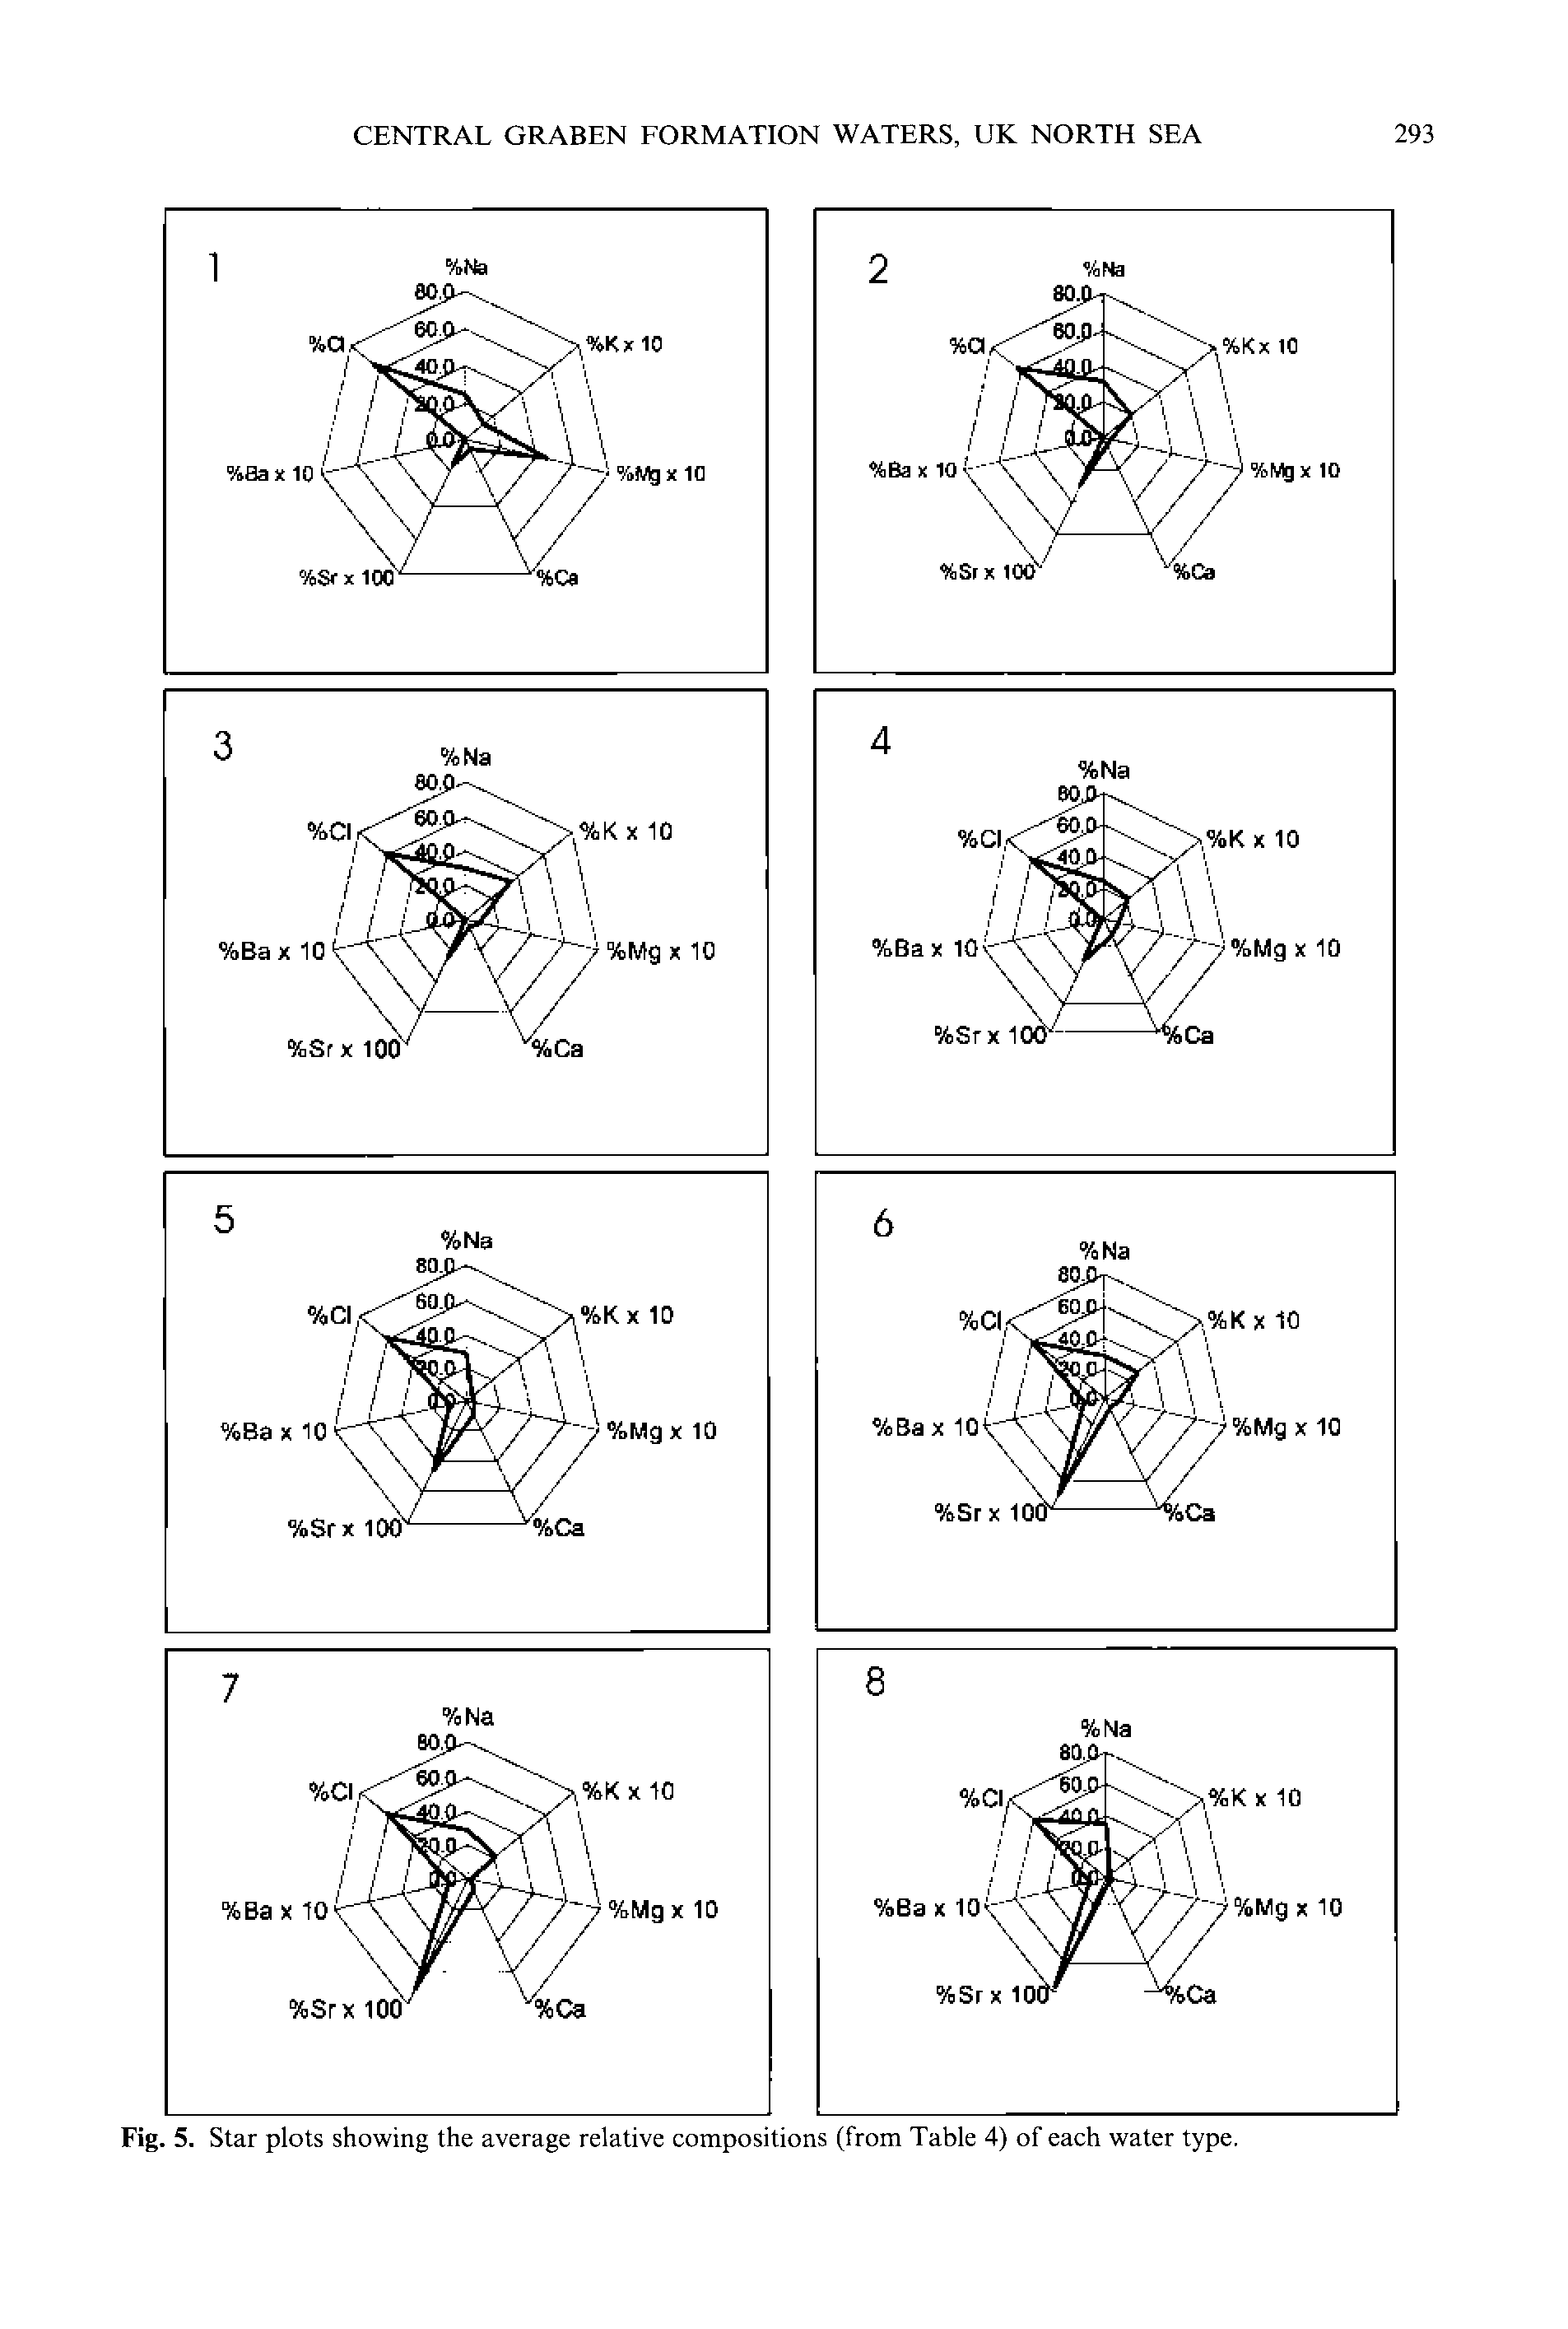 Fig. 5. Star plots showing the average relative compositions (from Table 4) of each water type.